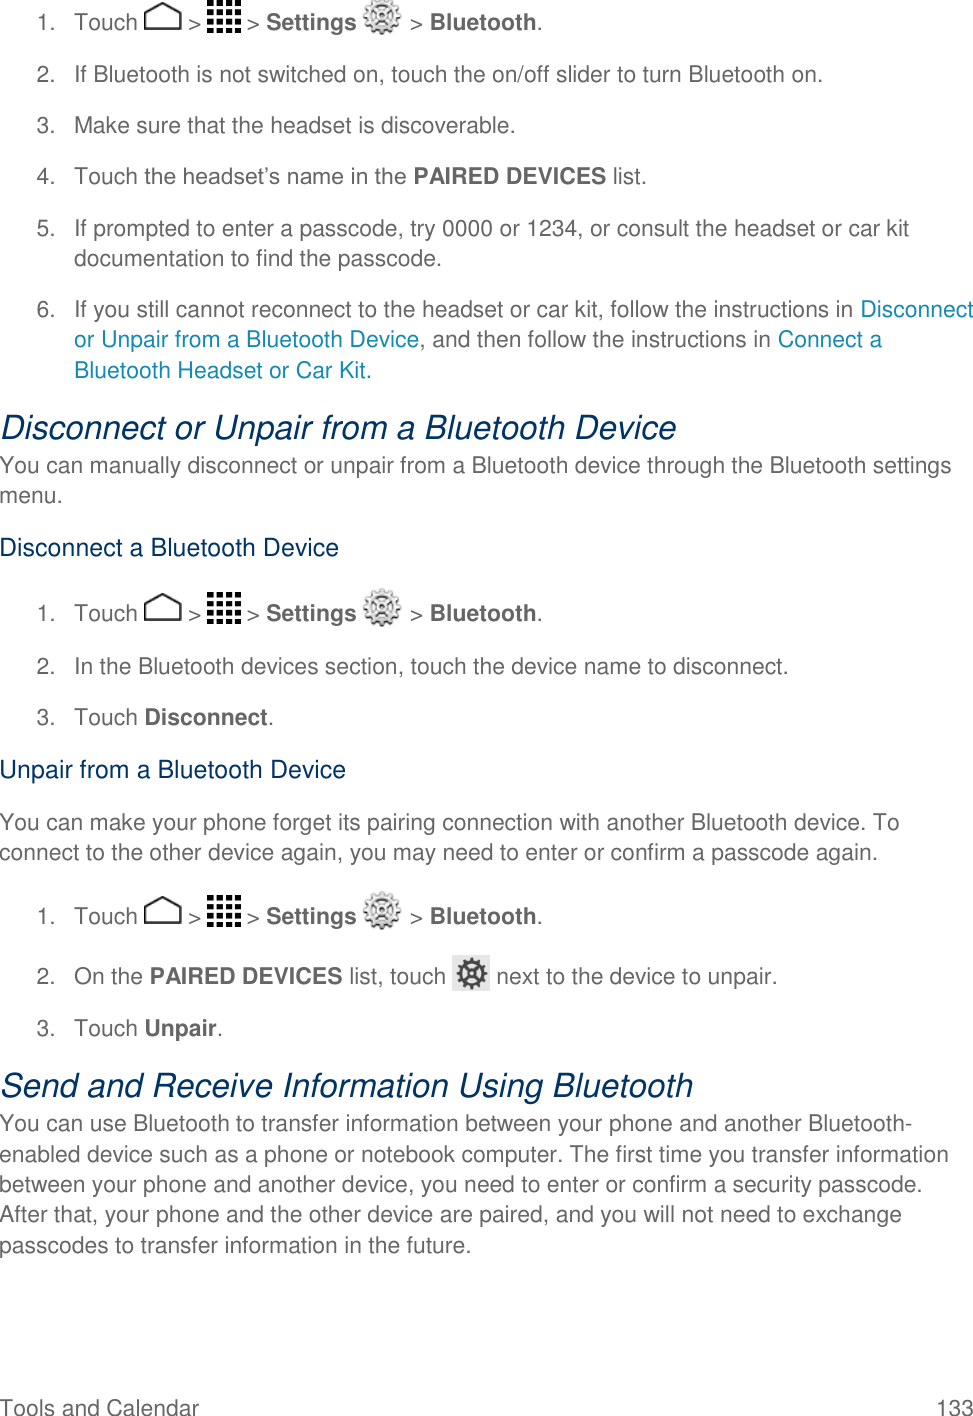 Tools and Calendar  133 1.  Touch   &gt;   &gt; Settings   &gt; Bluetooth. 2.  If Bluetooth is not switched on, touch the on/off slider to turn Bluetooth on. 3.  Make sure that the headset is discoverable. 4.  Touch the headset’s name in the PAIRED DEVICES list. 5.  If prompted to enter a passcode, try 0000 or 1234, or consult the headset or car kit documentation to find the passcode. 6.  If you still cannot reconnect to the headset or car kit, follow the instructions in Disconnect or Unpair from a Bluetooth Device, and then follow the instructions in Connect a Bluetooth Headset or Car Kit. Disconnect or Unpair from a Bluetooth Device You can manually disconnect or unpair from a Bluetooth device through the Bluetooth settings menu. Disconnect a Bluetooth Device 1.  Touch   &gt;   &gt; Settings   &gt; Bluetooth. 2.  In the Bluetooth devices section, touch the device name to disconnect. 3.  Touch Disconnect. Unpair from a Bluetooth Device You can make your phone forget its pairing connection with another Bluetooth device. To connect to the other device again, you may need to enter or confirm a passcode again. 1.  Touch   &gt;   &gt; Settings   &gt; Bluetooth. 2.  On the PAIRED DEVICES list, touch   next to the device to unpair. 3.  Touch Unpair. Send and Receive Information Using Bluetooth You can use Bluetooth to transfer information between your phone and another Bluetooth-enabled device such as a phone or notebook computer. The first time you transfer information between your phone and another device, you need to enter or confirm a security passcode. After that, your phone and the other device are paired, and you will not need to exchange passcodes to transfer information in the future. 